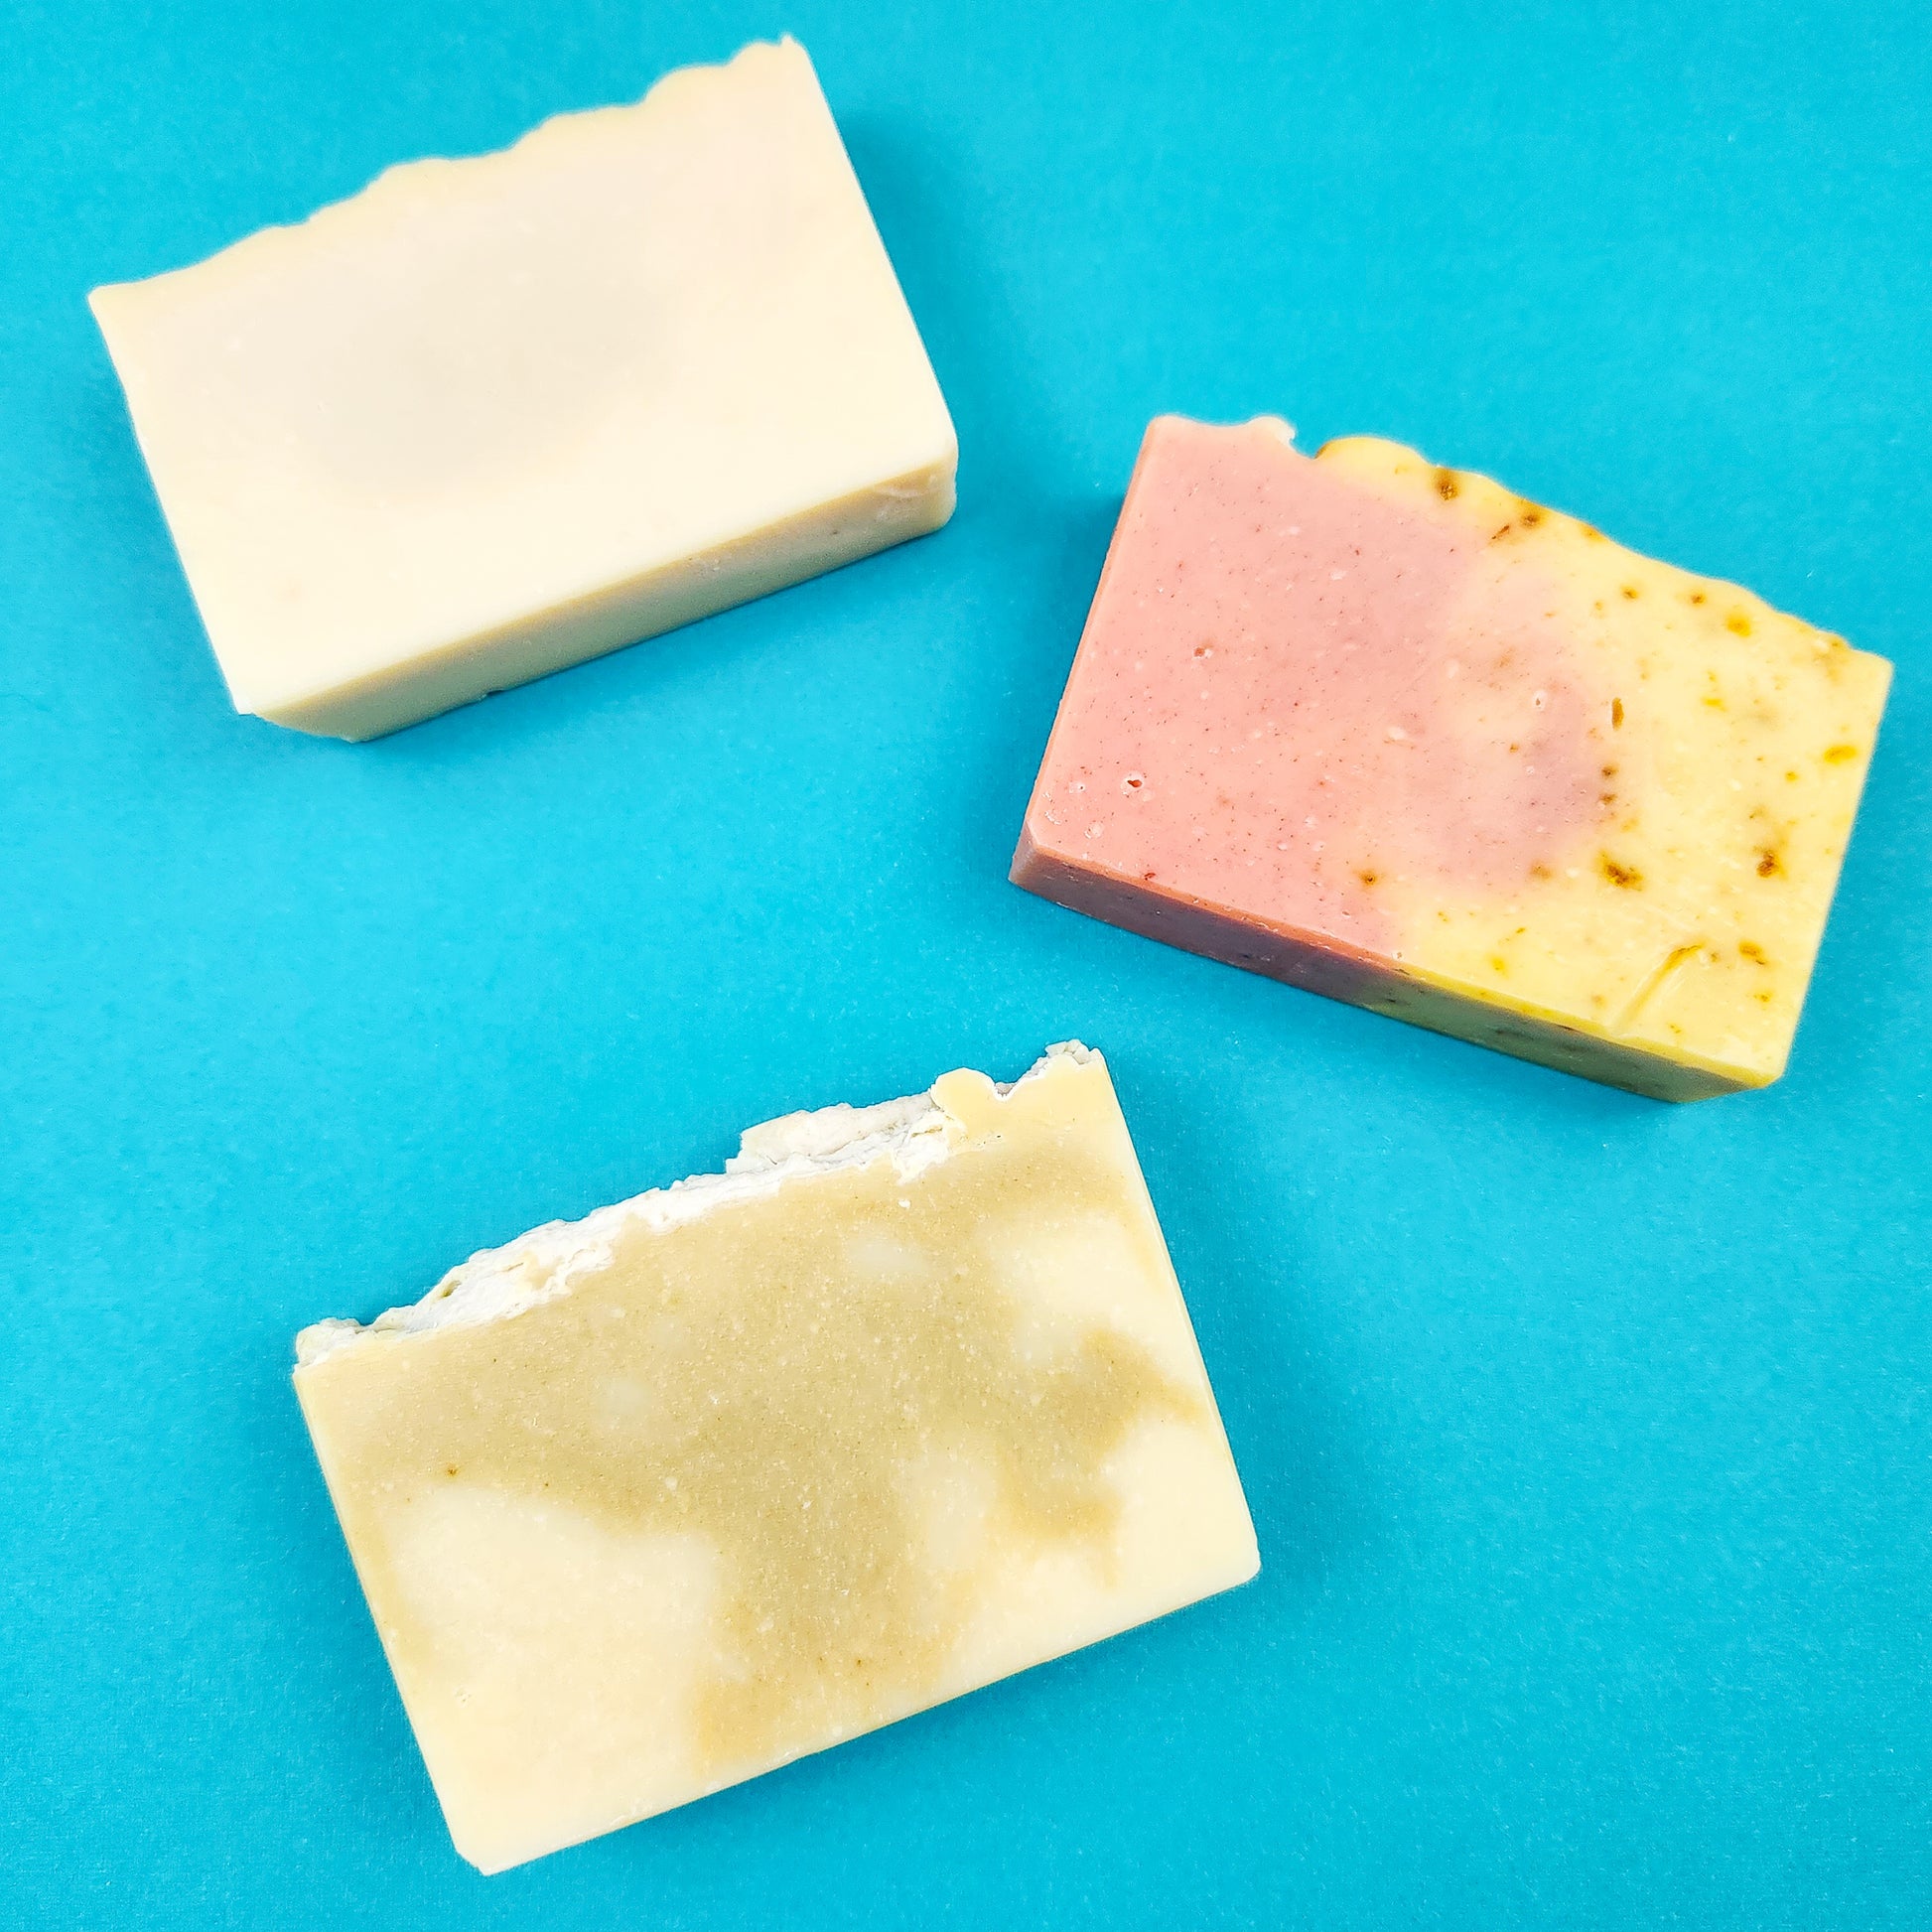 Three Bright Naturals soaps on a blue background